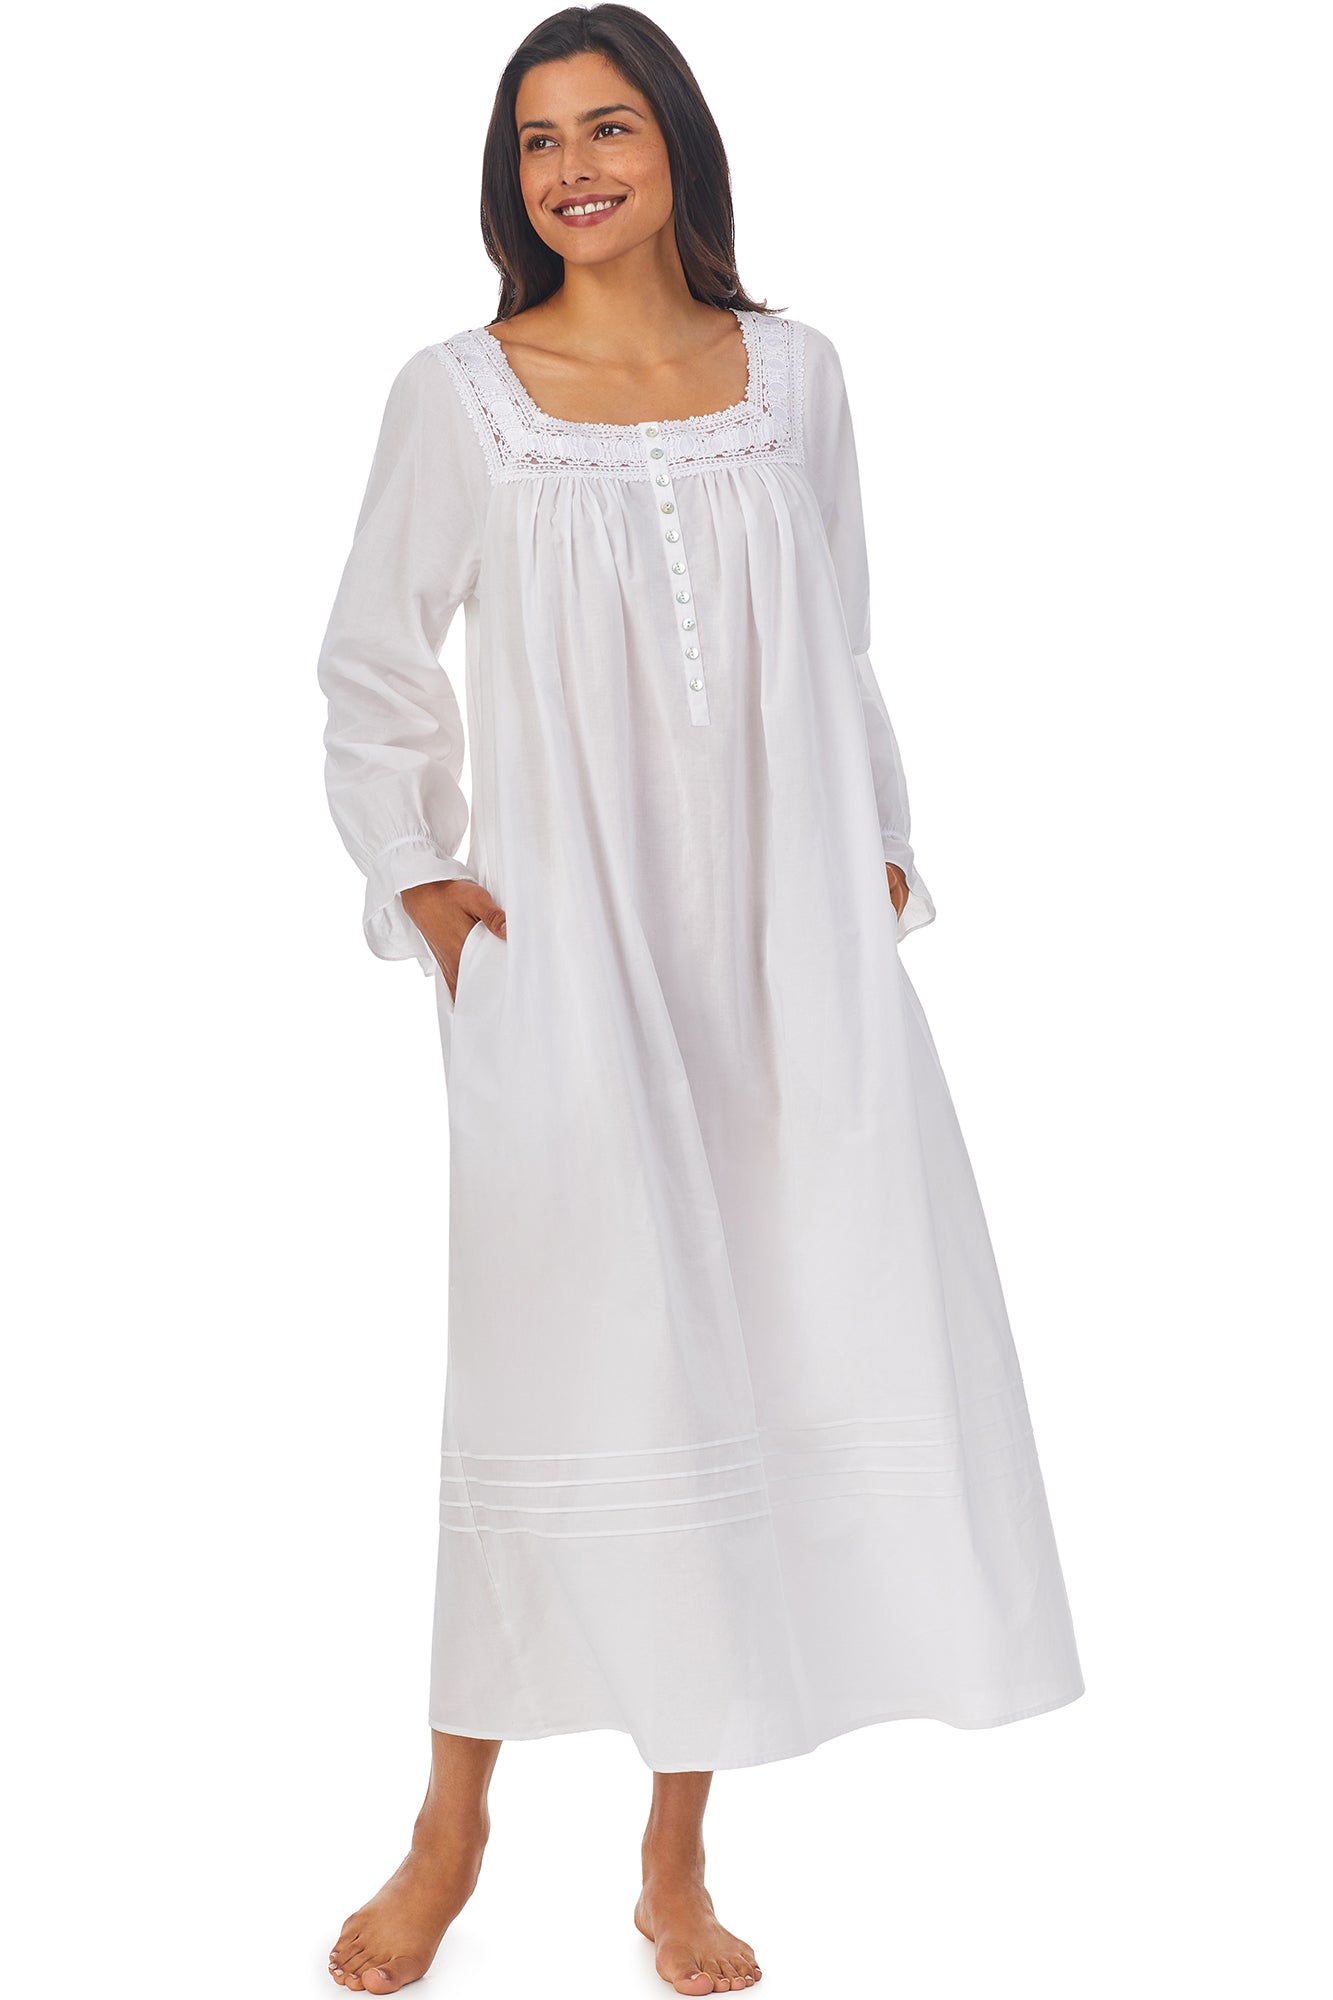 A lady wearing white long sleeve nightgown